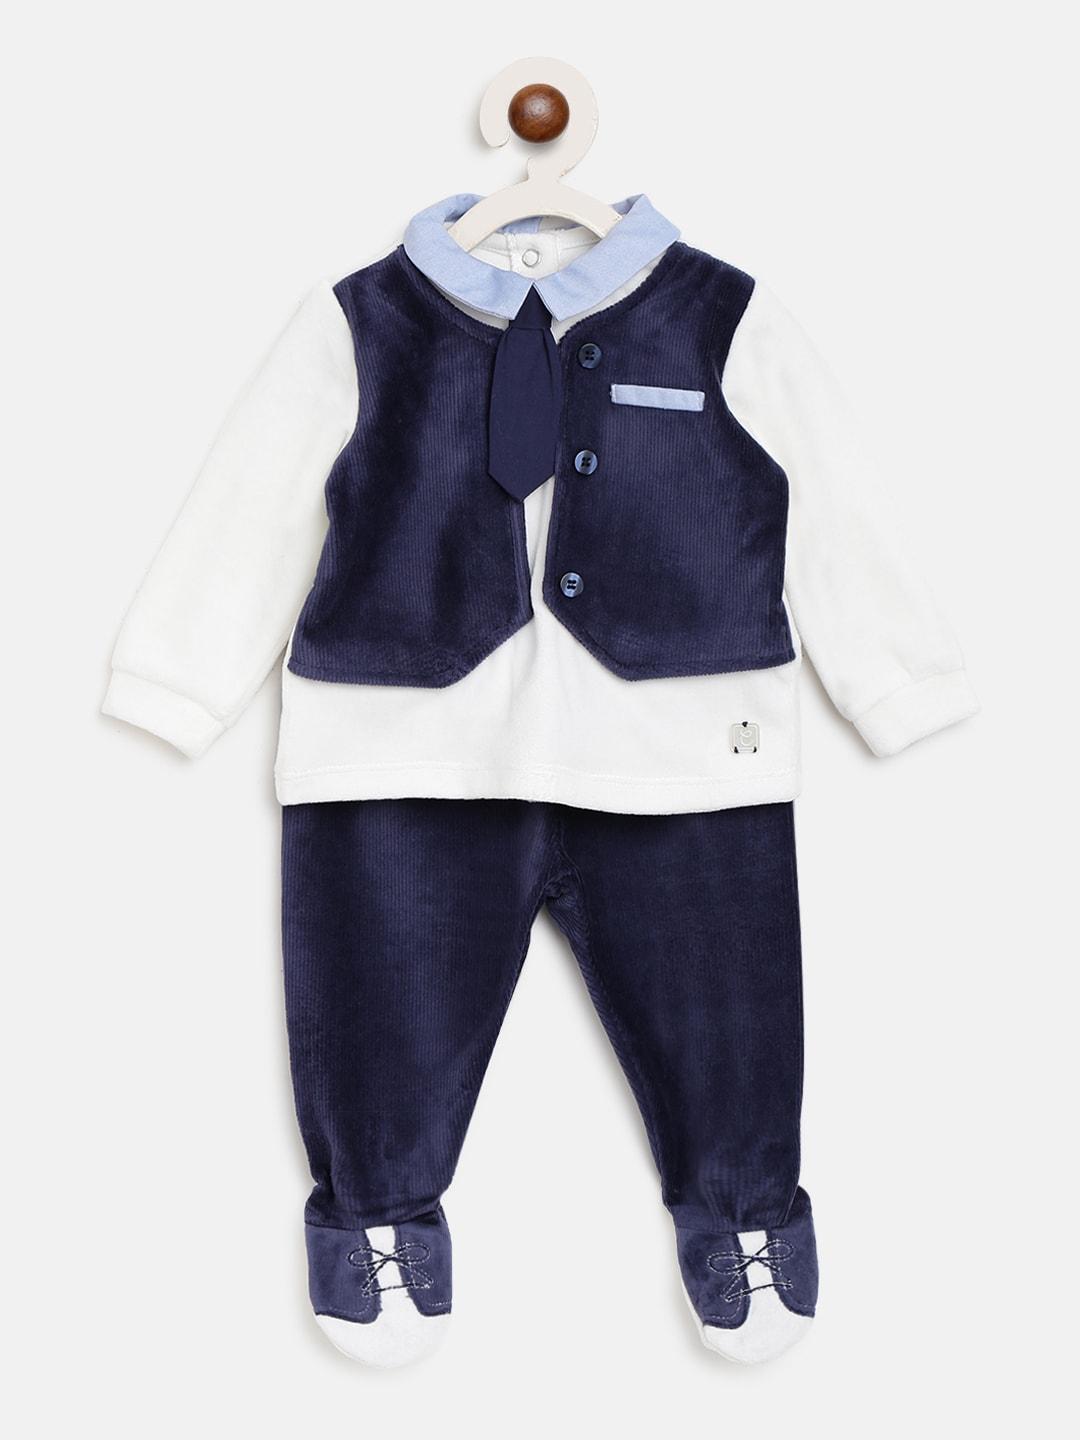 chicco-infant-boys-navy-blue-&-white-solid-clothing-set